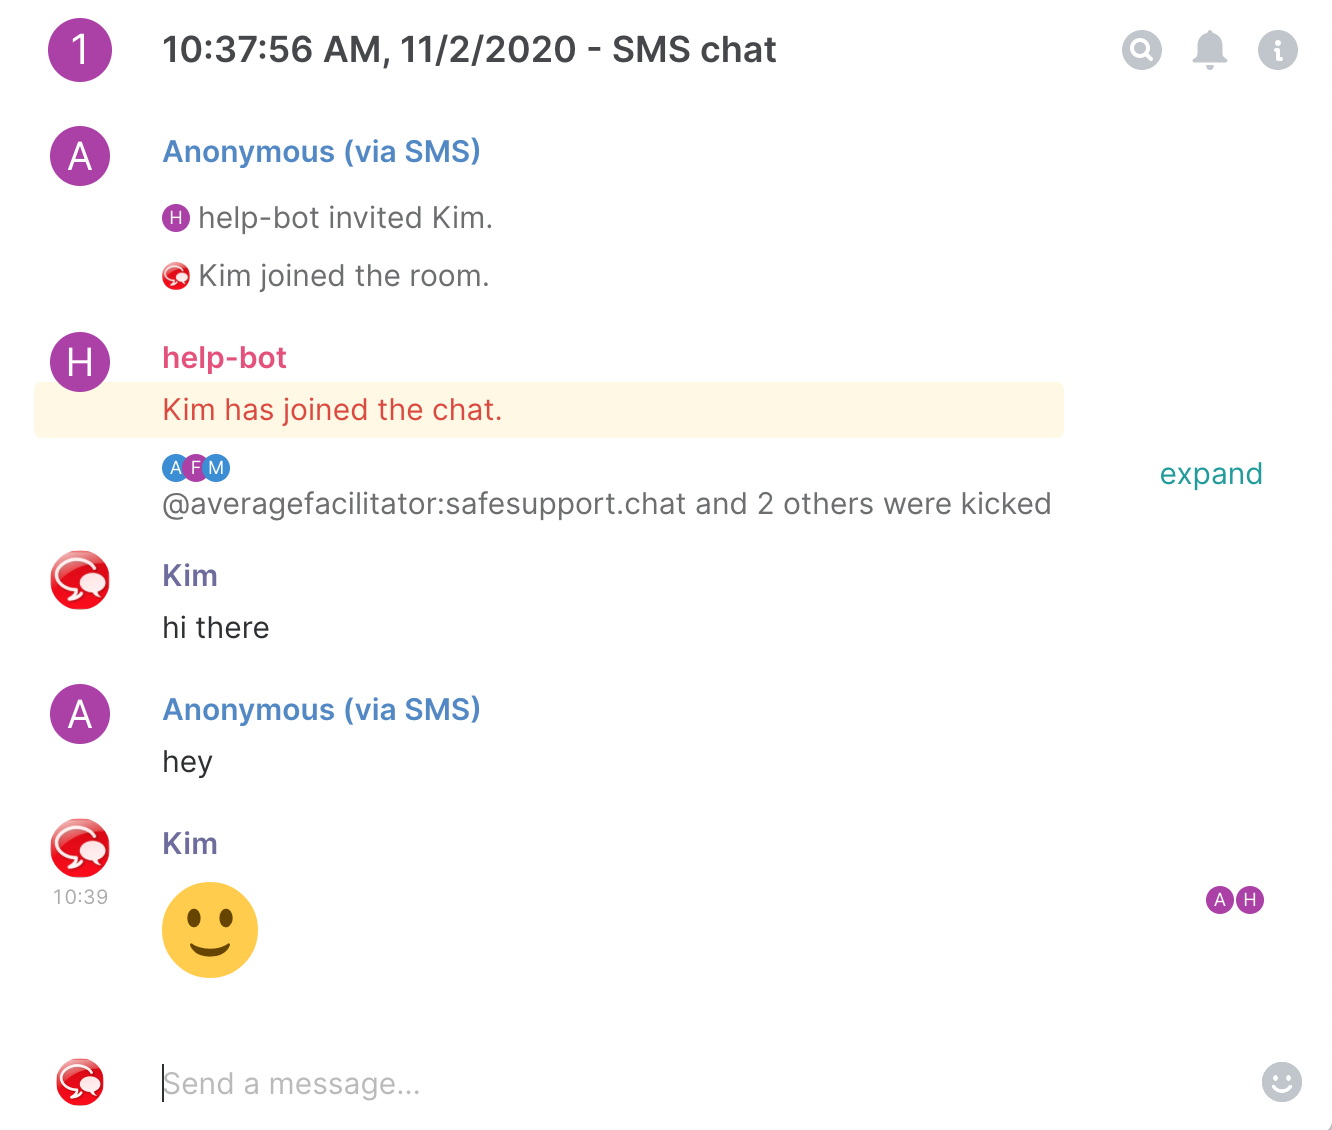 Screenshot of the facilitator's view of a chat session from SMS